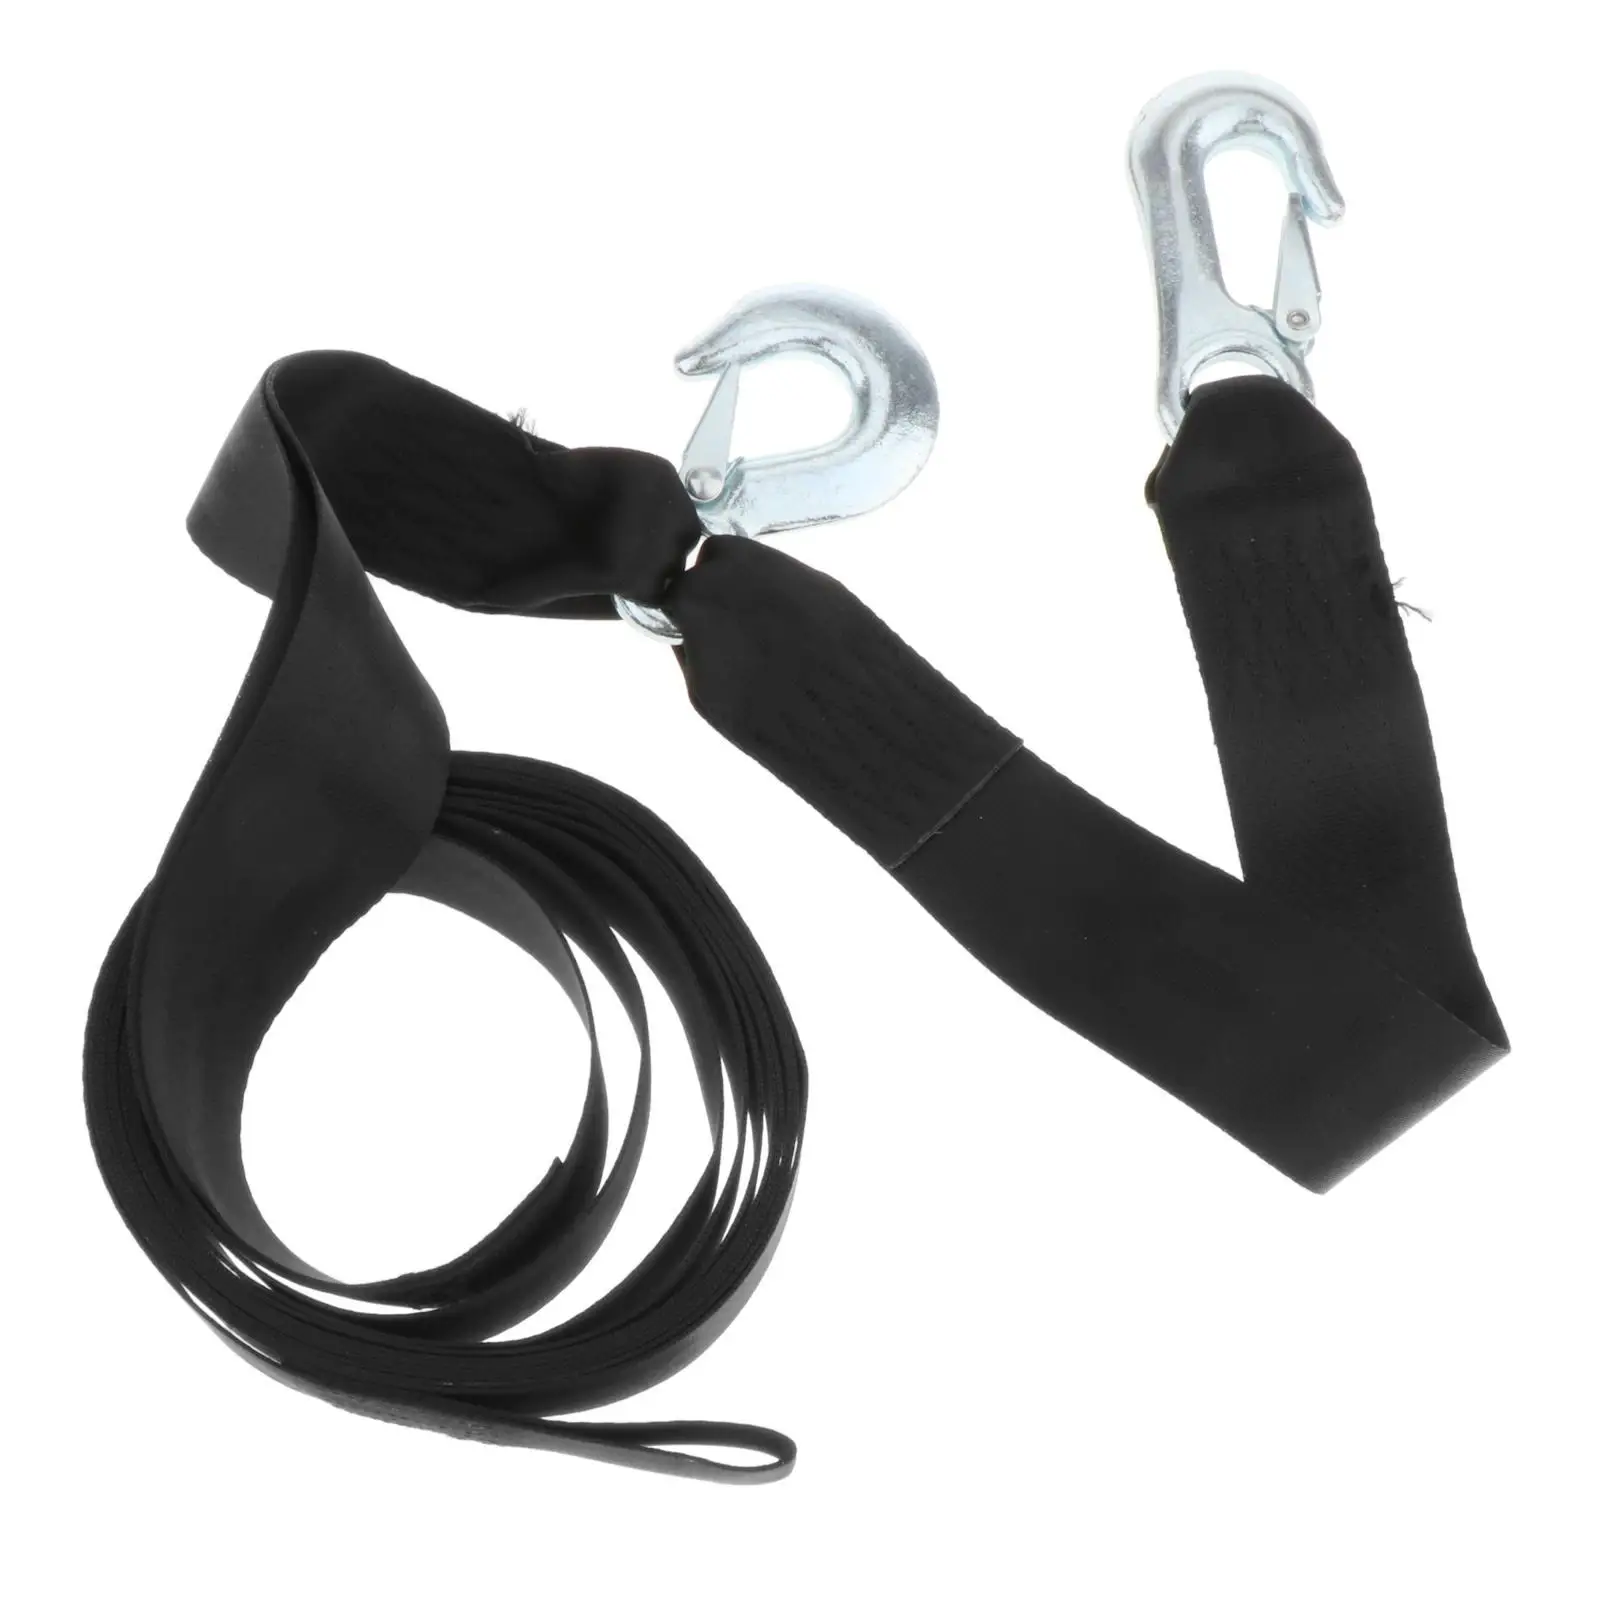 6m Boat Winch Strap Two Hooks Attachment  Runner Towing Equipment